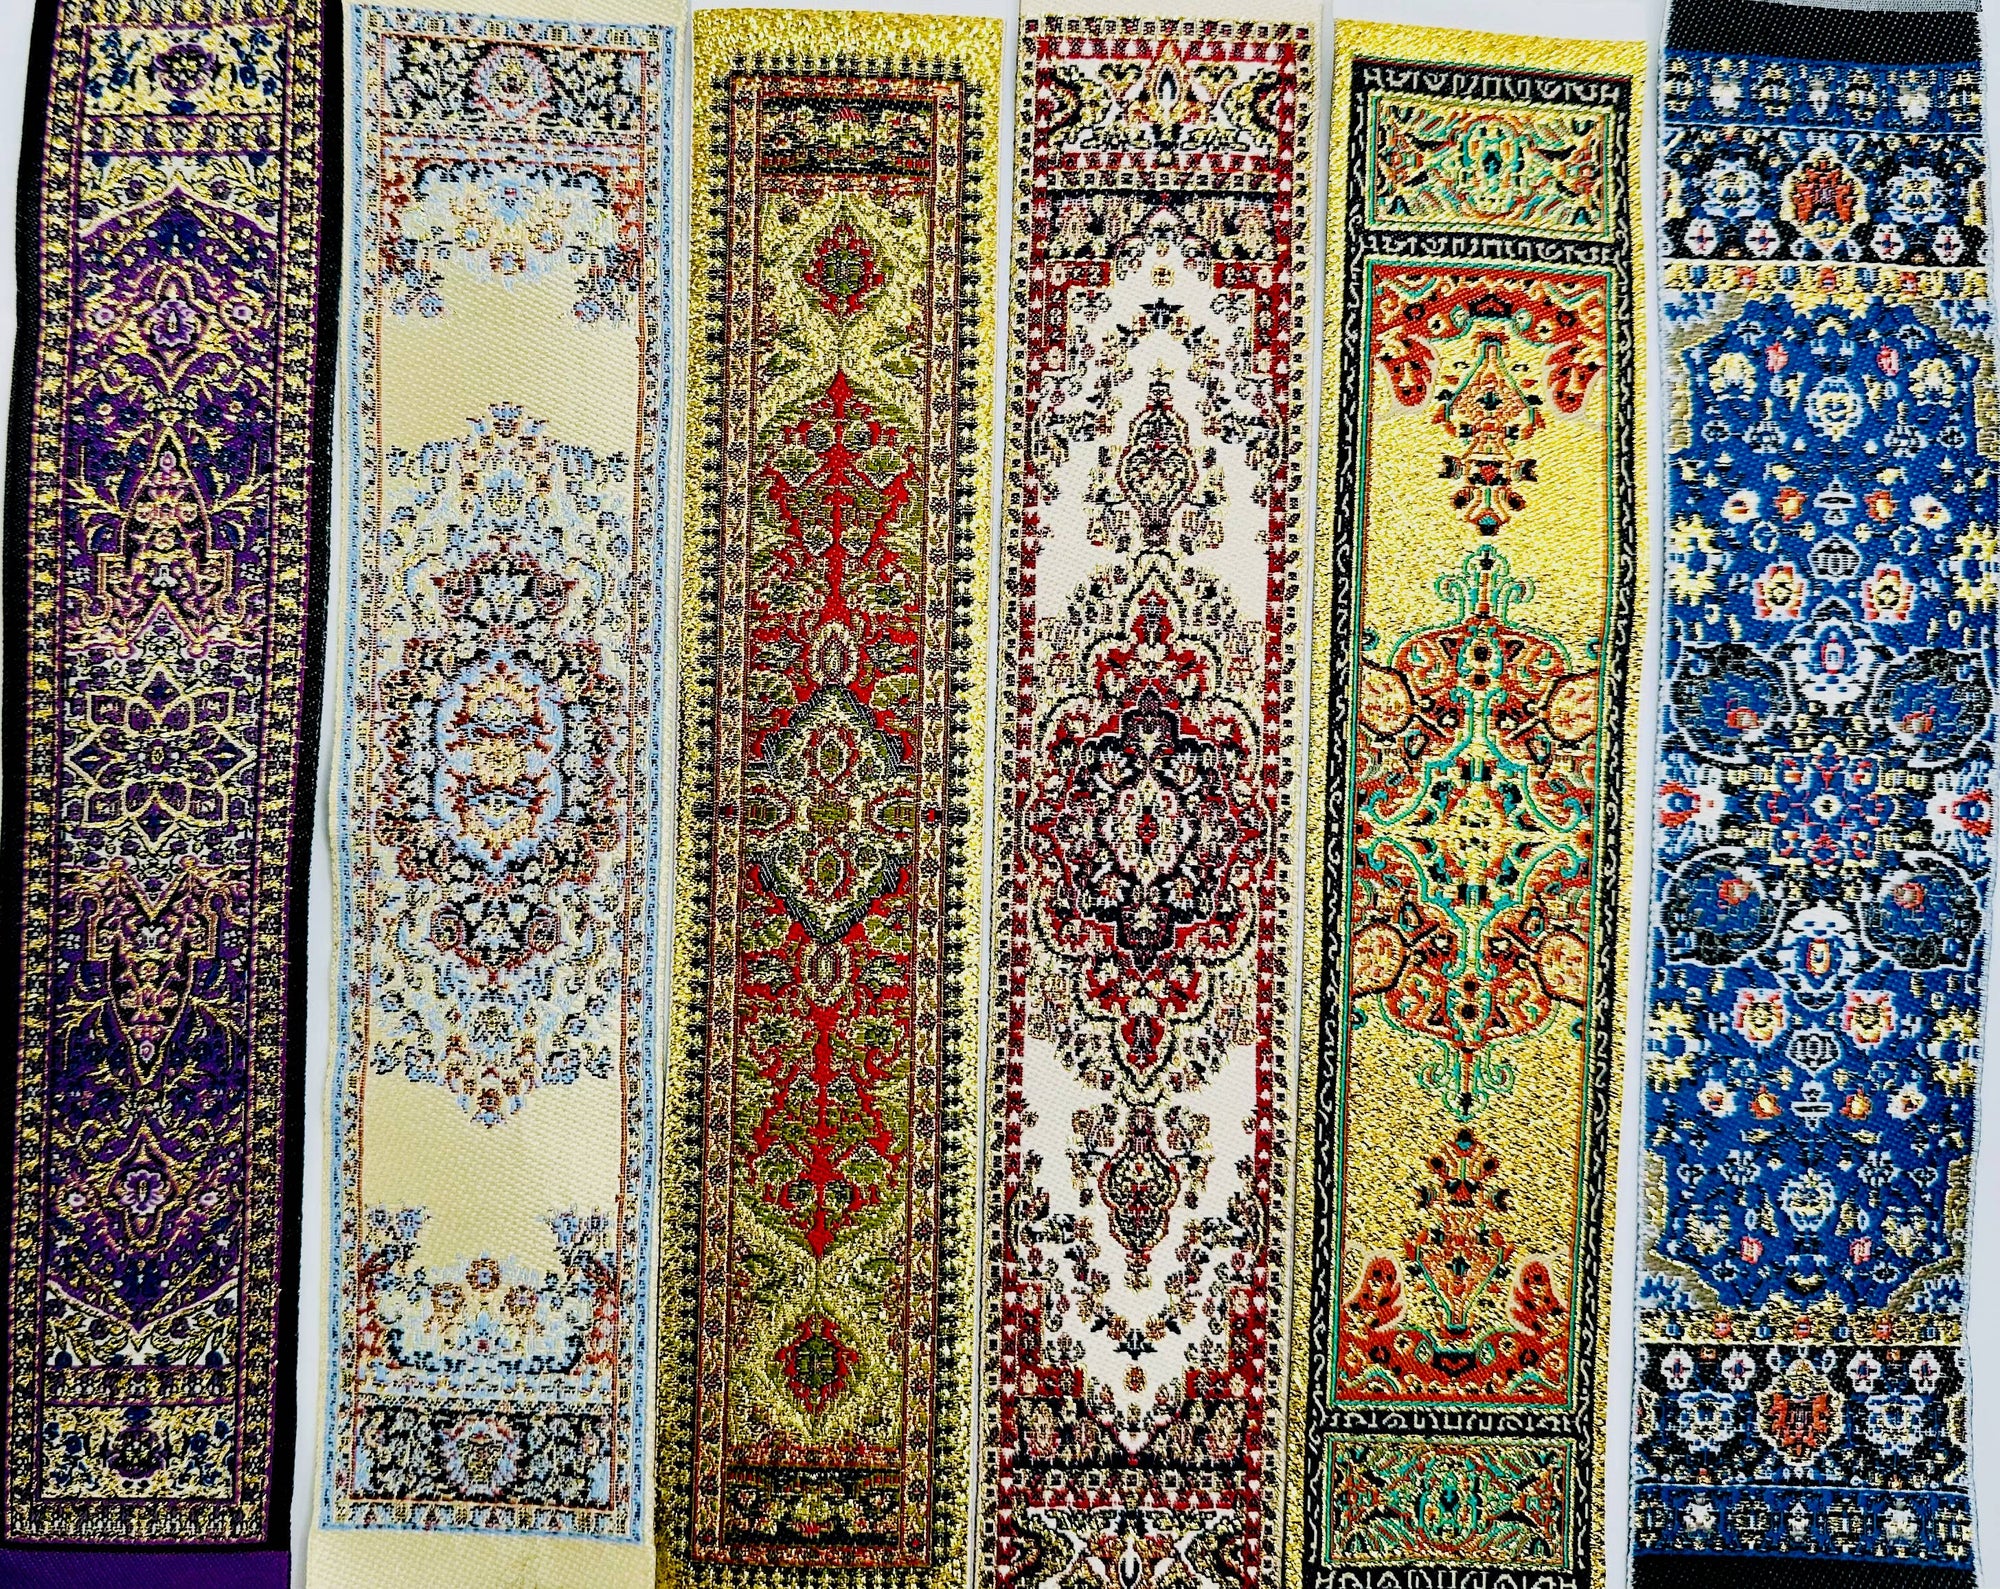 A display of various intricate, colorful, individually packaged Turkish Bookmarks featuring traditional patterns typically found in Turkish carpet designs.